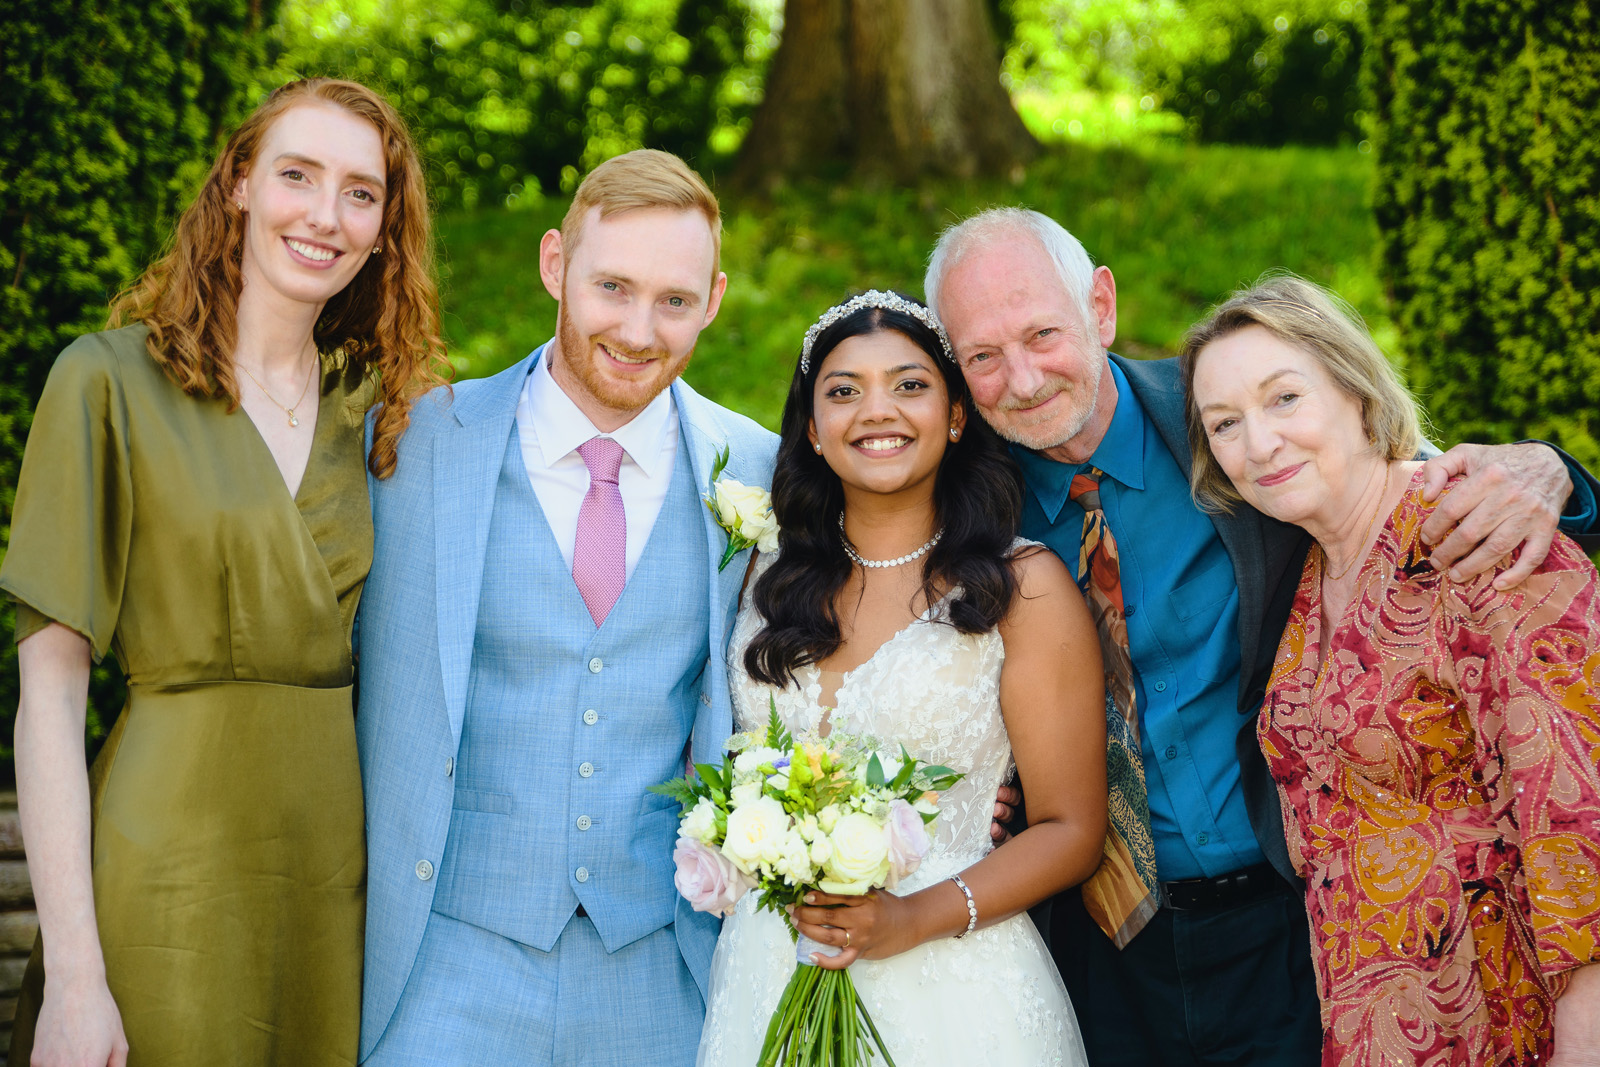 Wedding Photographer at Coombe Lodge